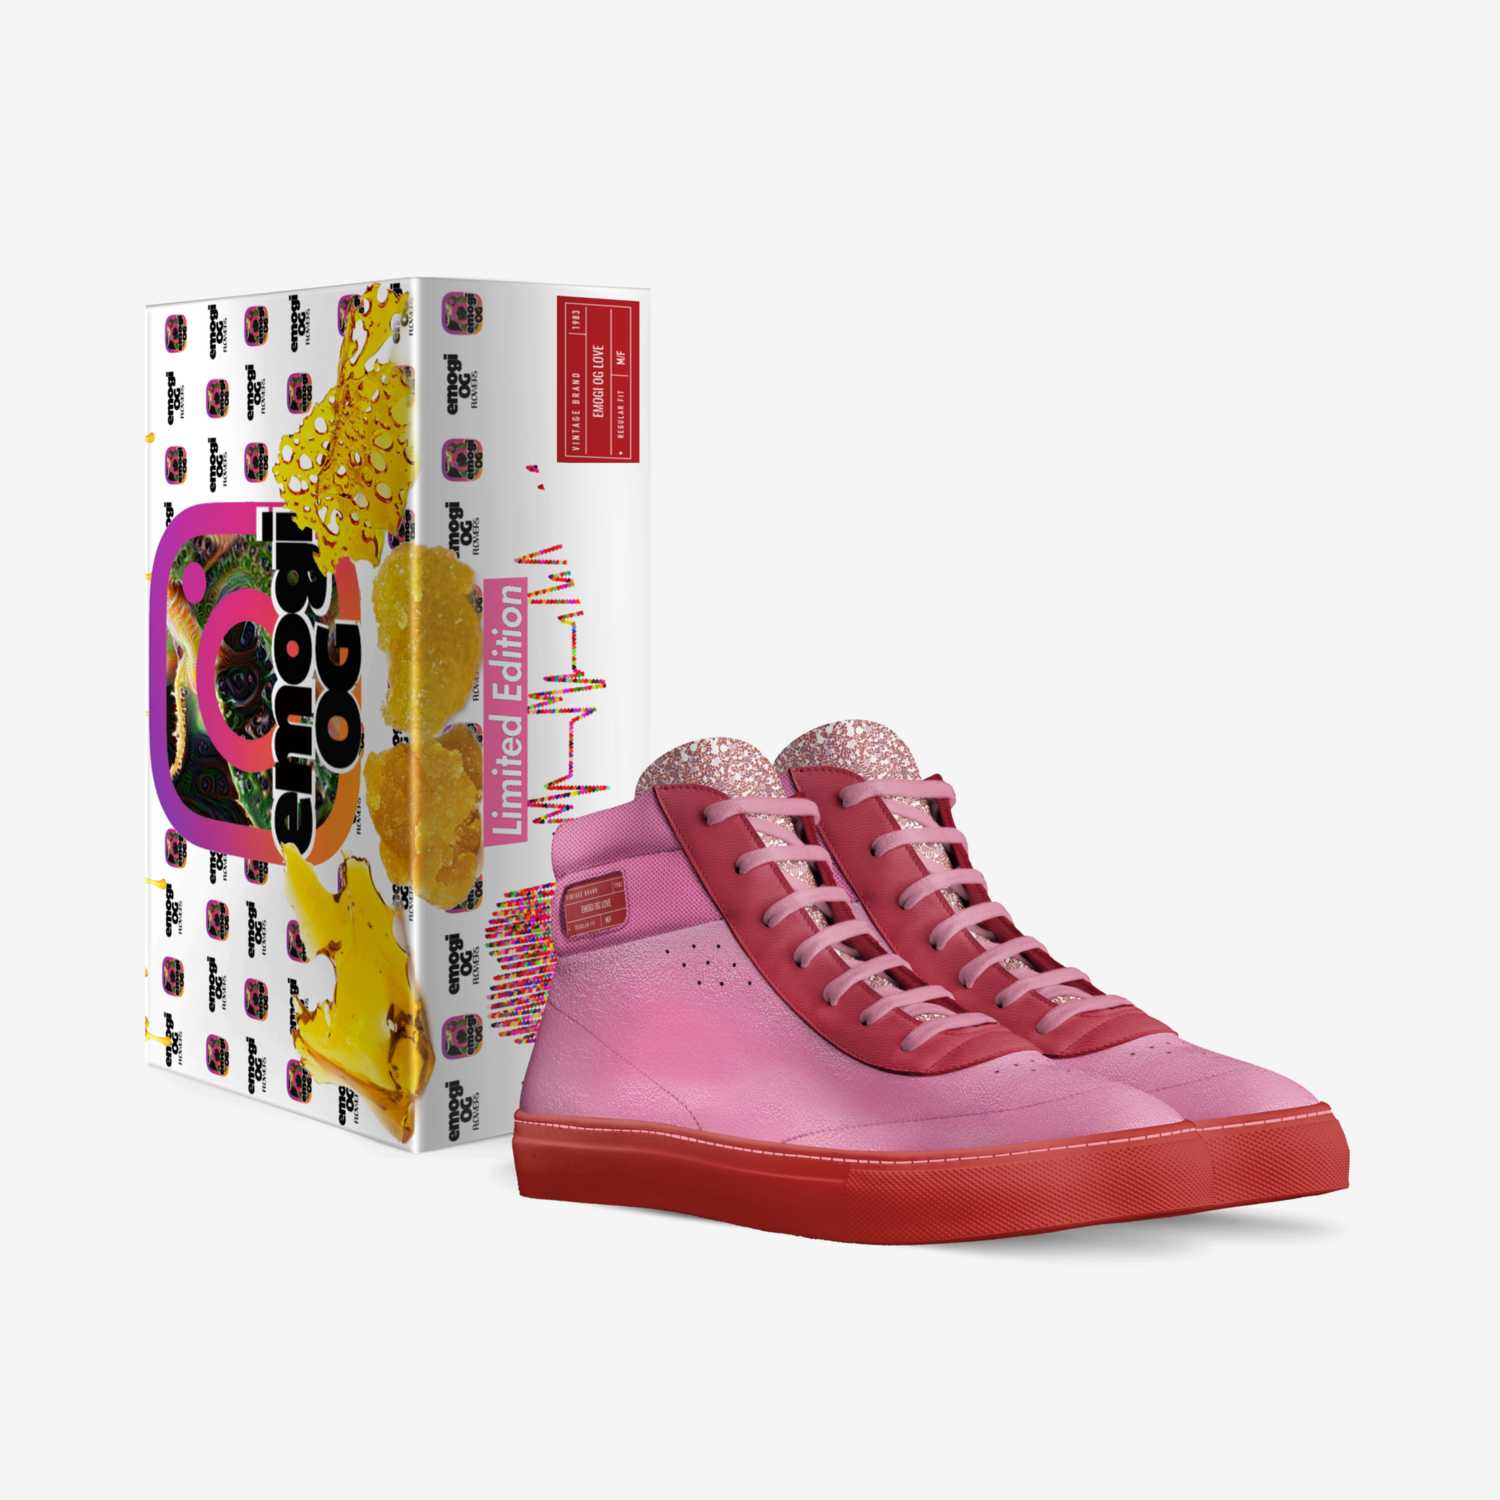 Emogi Og Love custom made in Italy shoes by Jennifer Hollywood | Box view